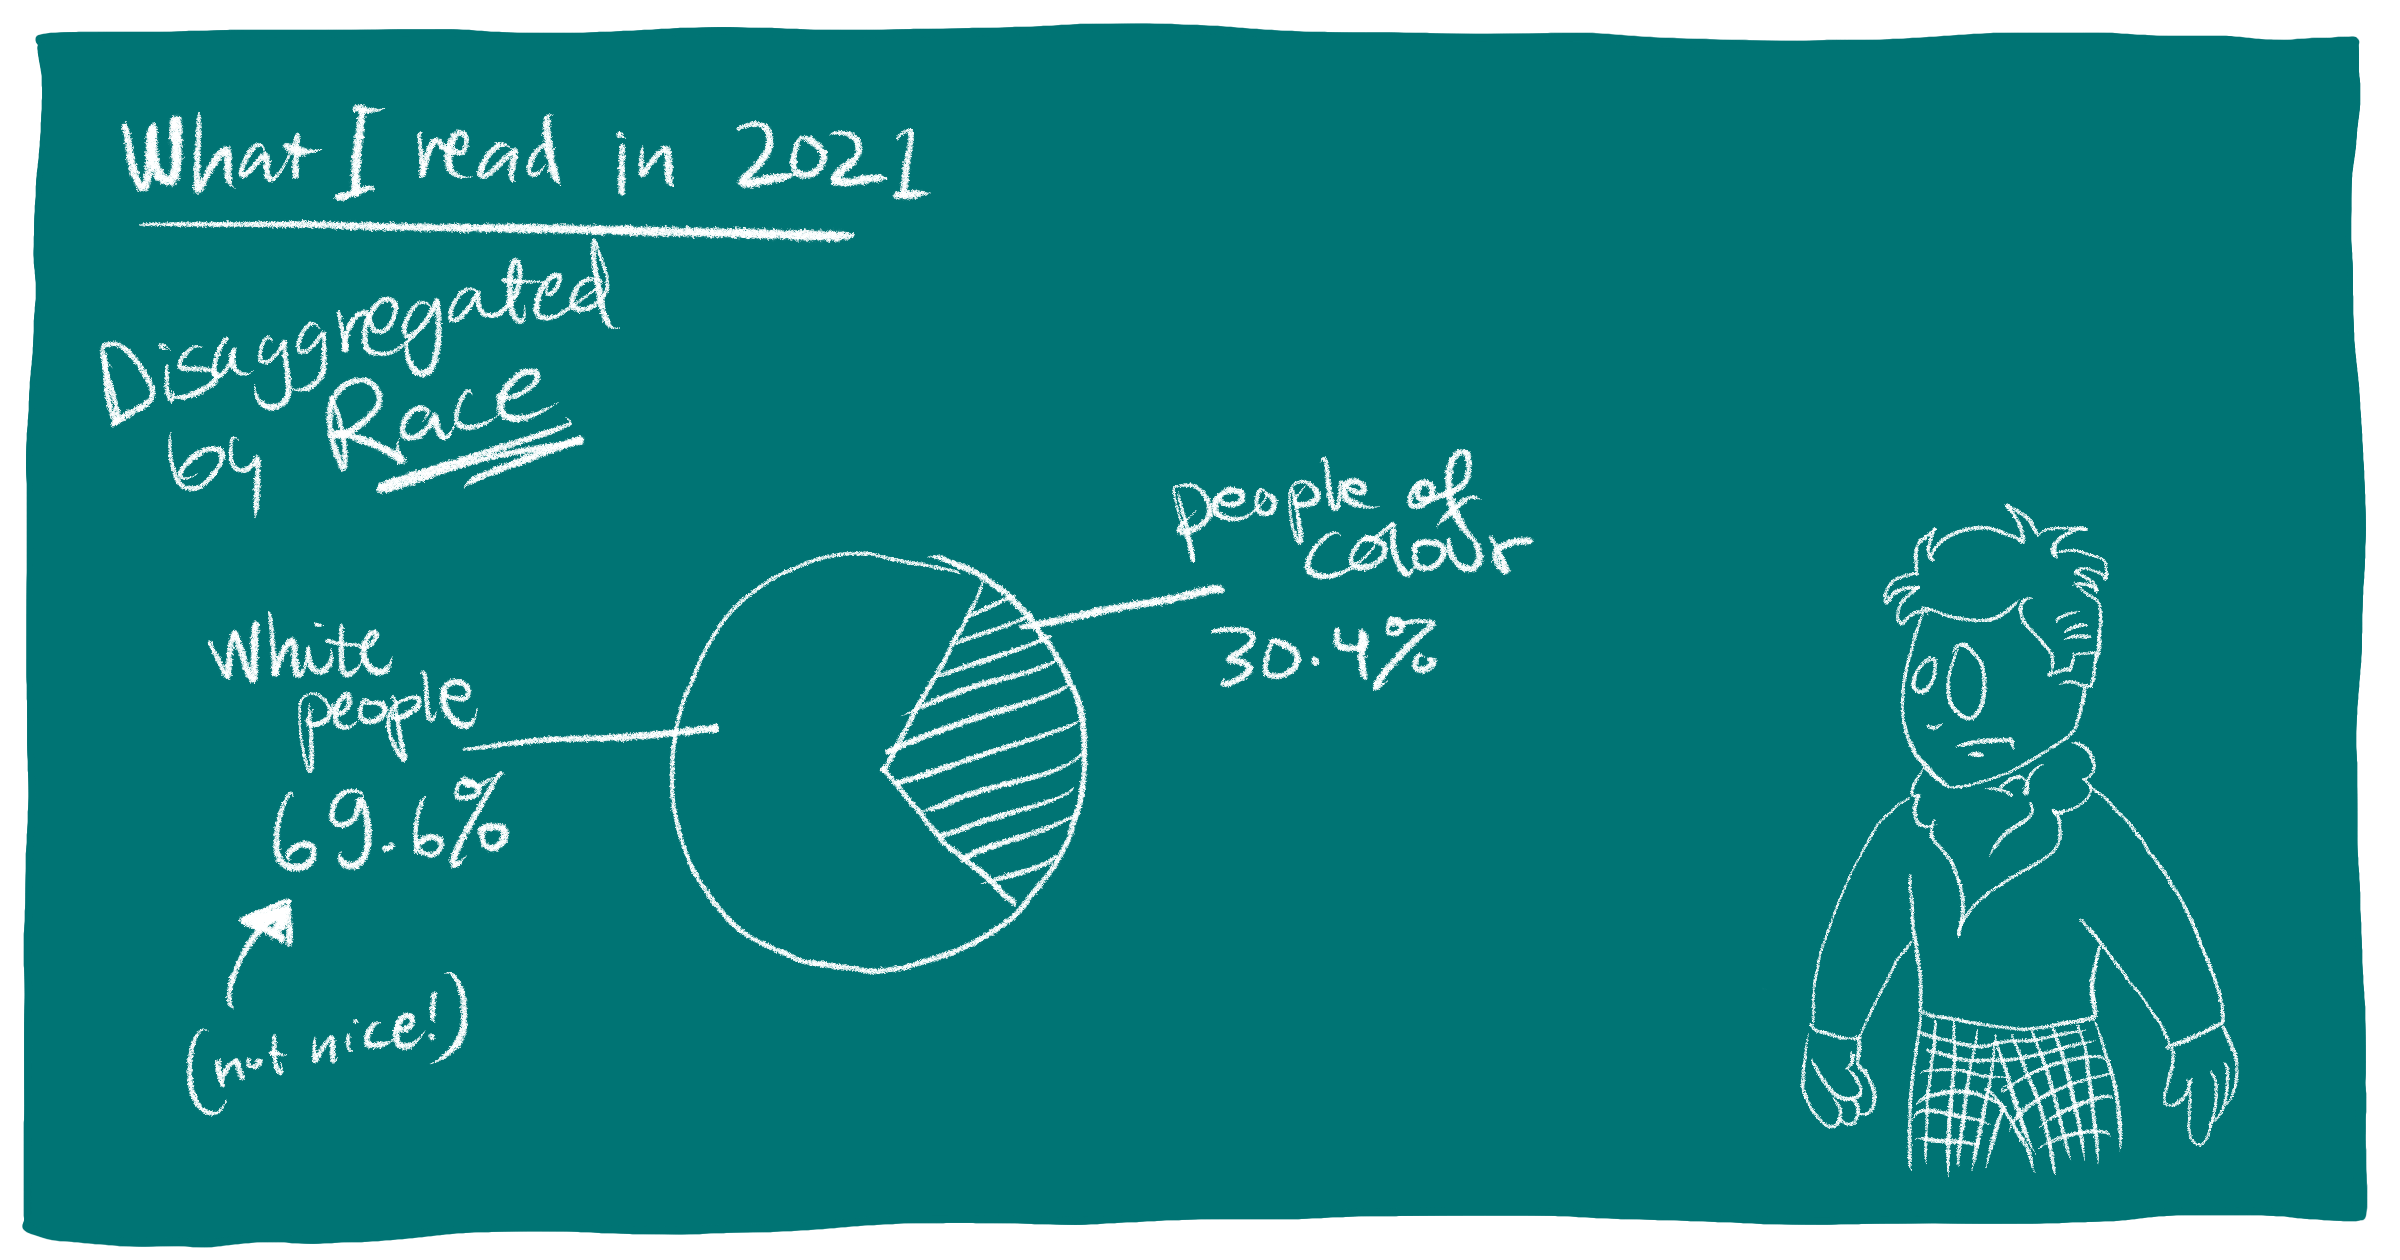 Chalkboard depicting a pie chart of the split disaggregated by race with drawing of Disney Carlos in a corner looking disappointed.